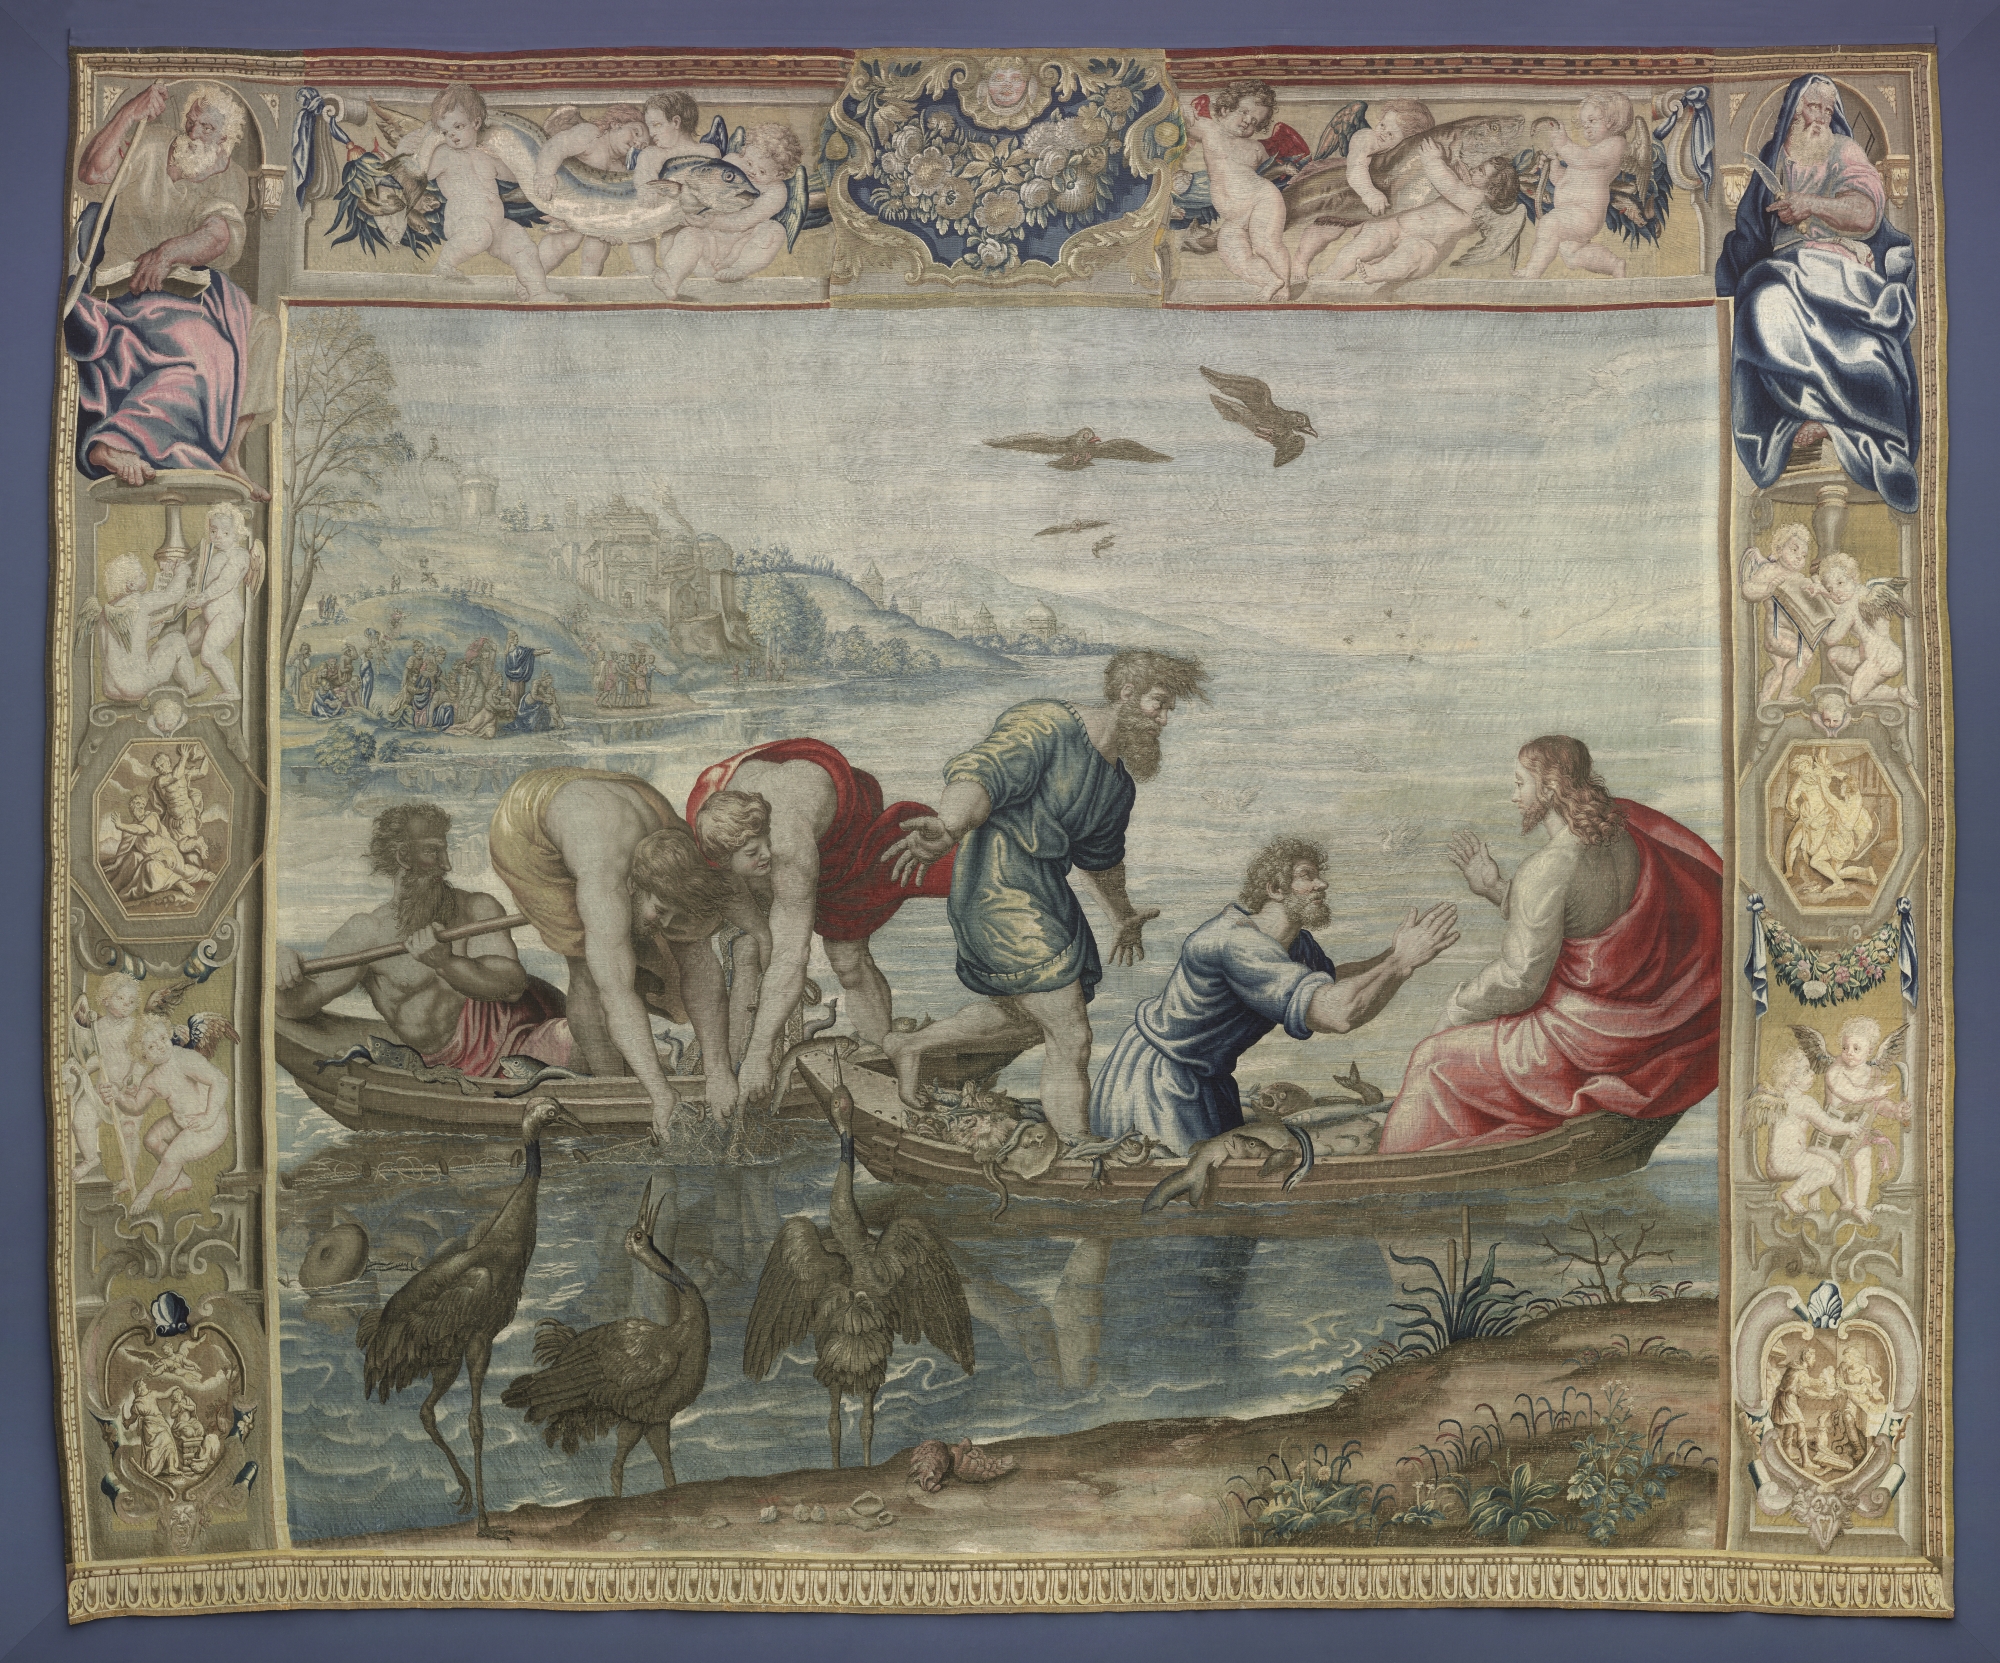 Mortlake Tapestry Manufactory (after designs by Raphael), The Miraculous Draft of Fishes, After 1625.Tapestry, Staatliche Kunstsammlungen Dresden, Gemäldegalerie Alte Meister, gal. no. B1